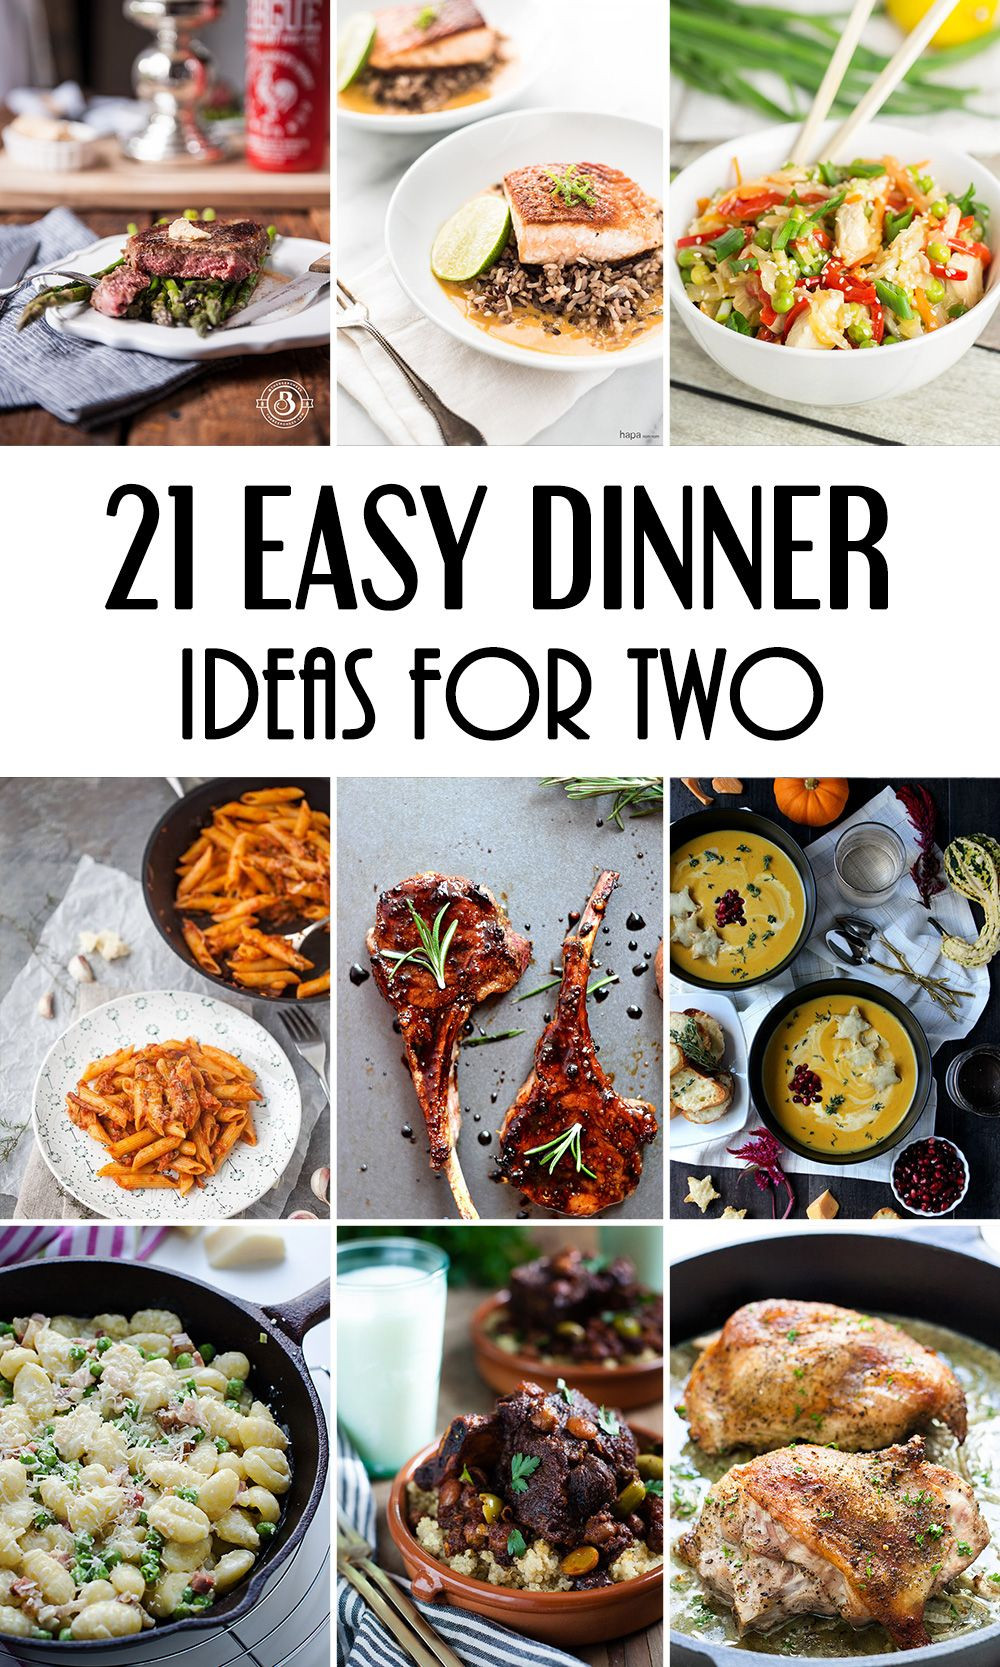 Easy Healthy Dinners For Two
 21 Easy Dinner Ideas For Two That Will Impress Your Loved